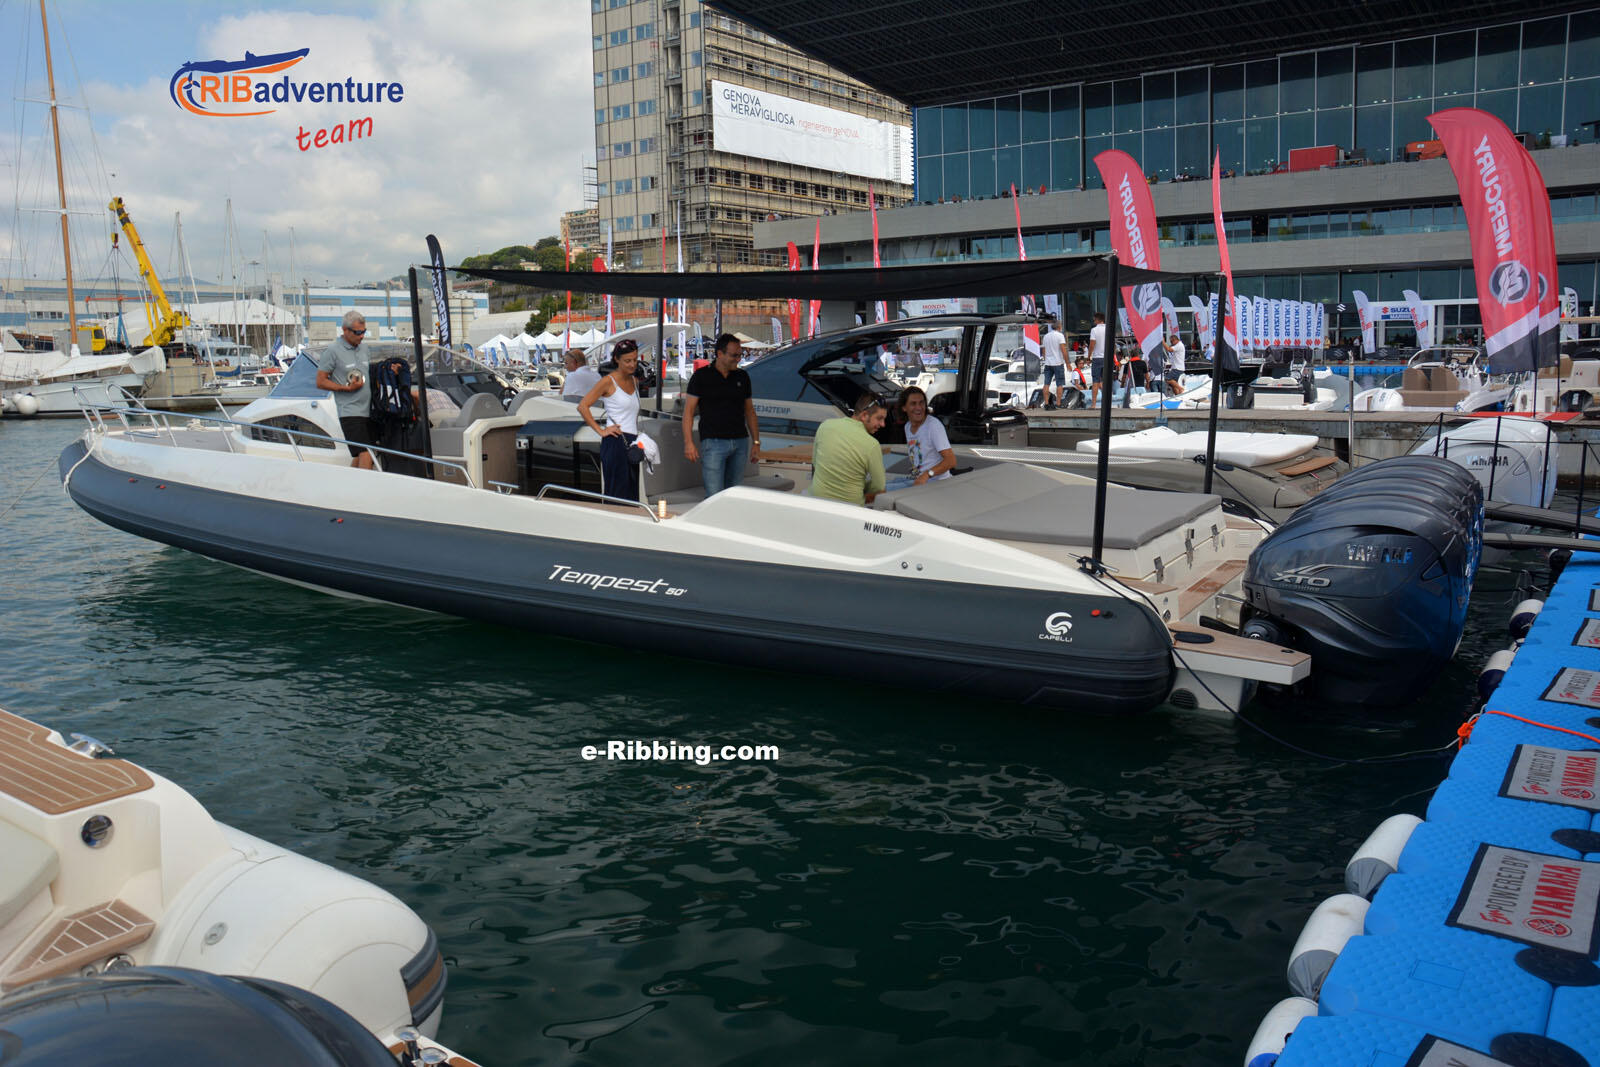 58th Genoa International Boat Show (20th - 25th of September 2018)